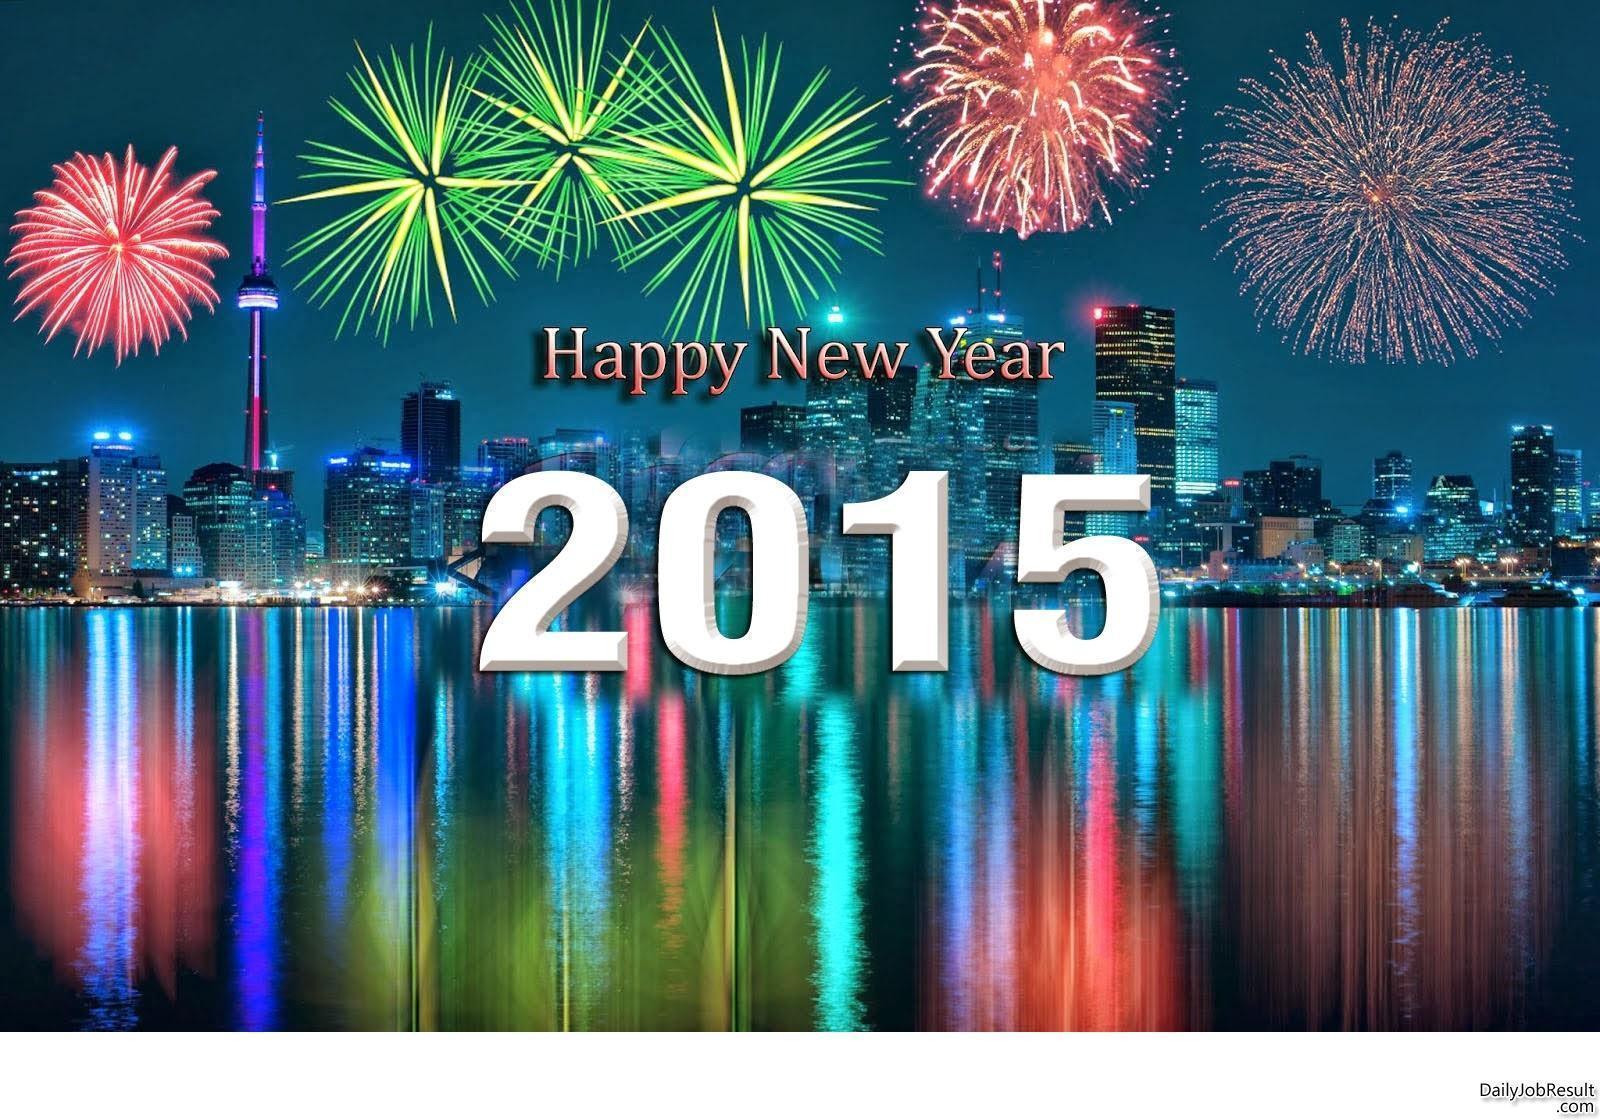 Happy New Year 2015 HD Wallpaper Image Photo Quotes Facebook